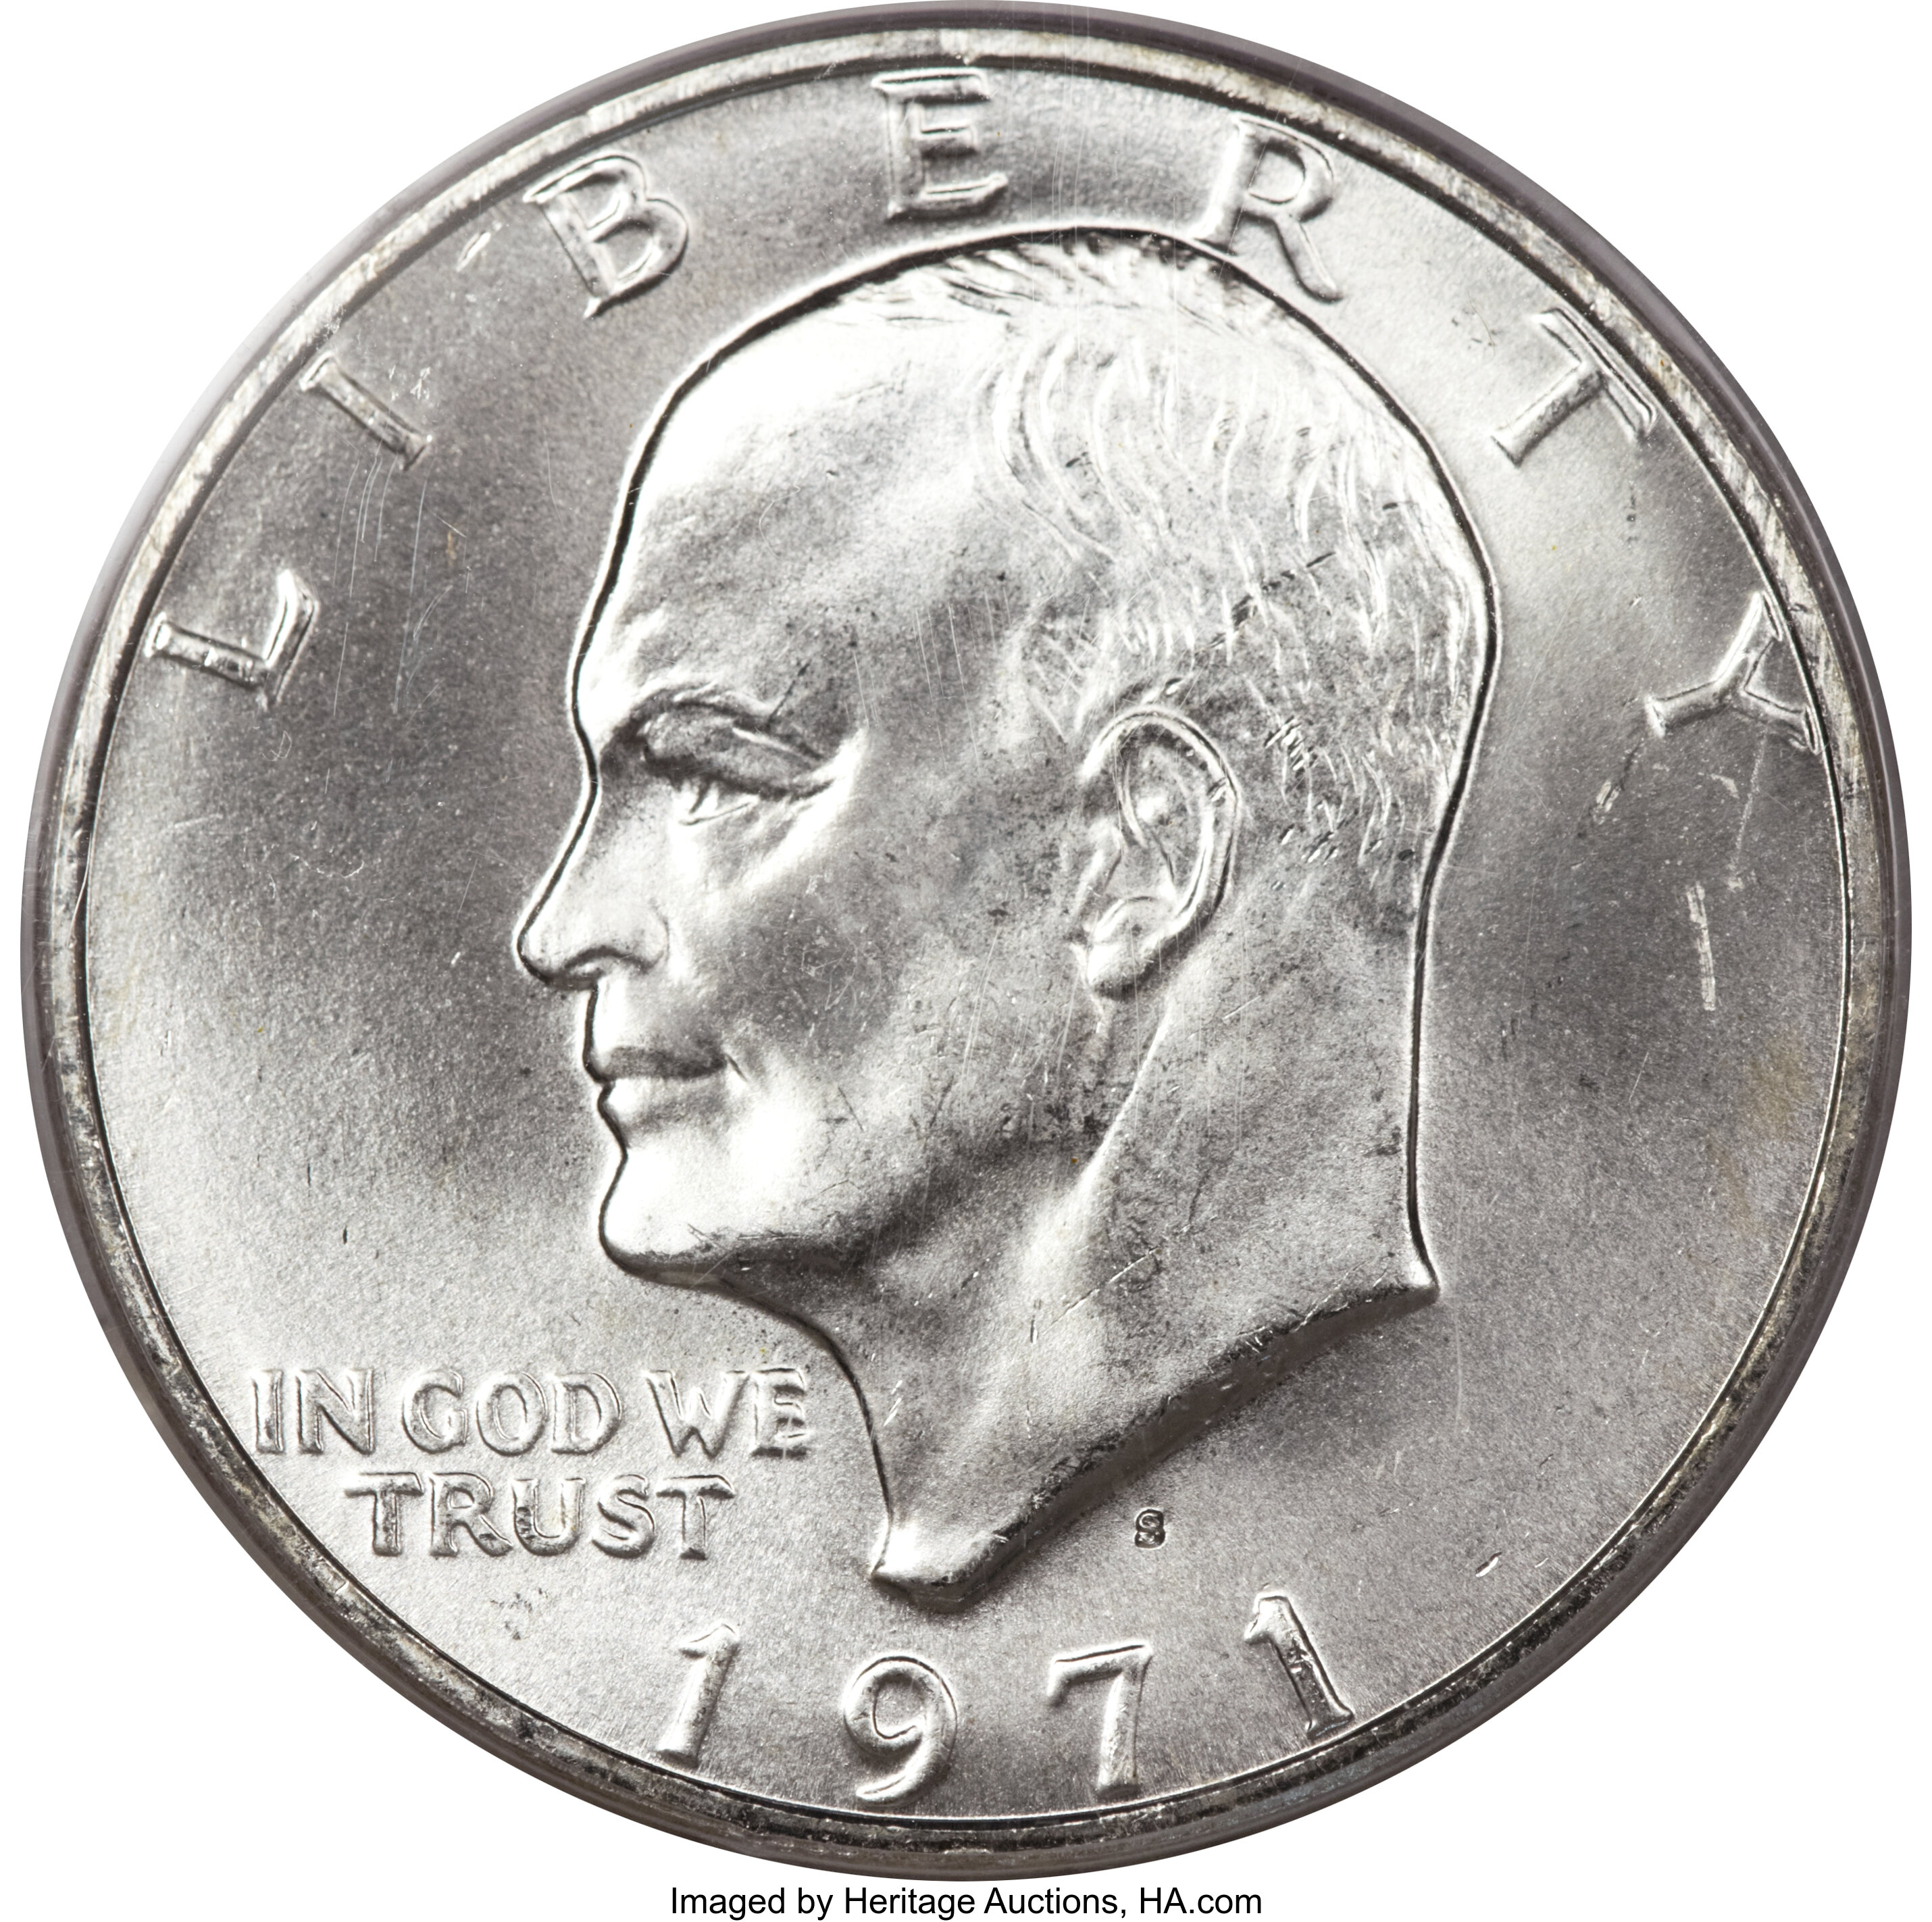 A 1971 Silver Dollar Prototype Headed to Auction for the First Time